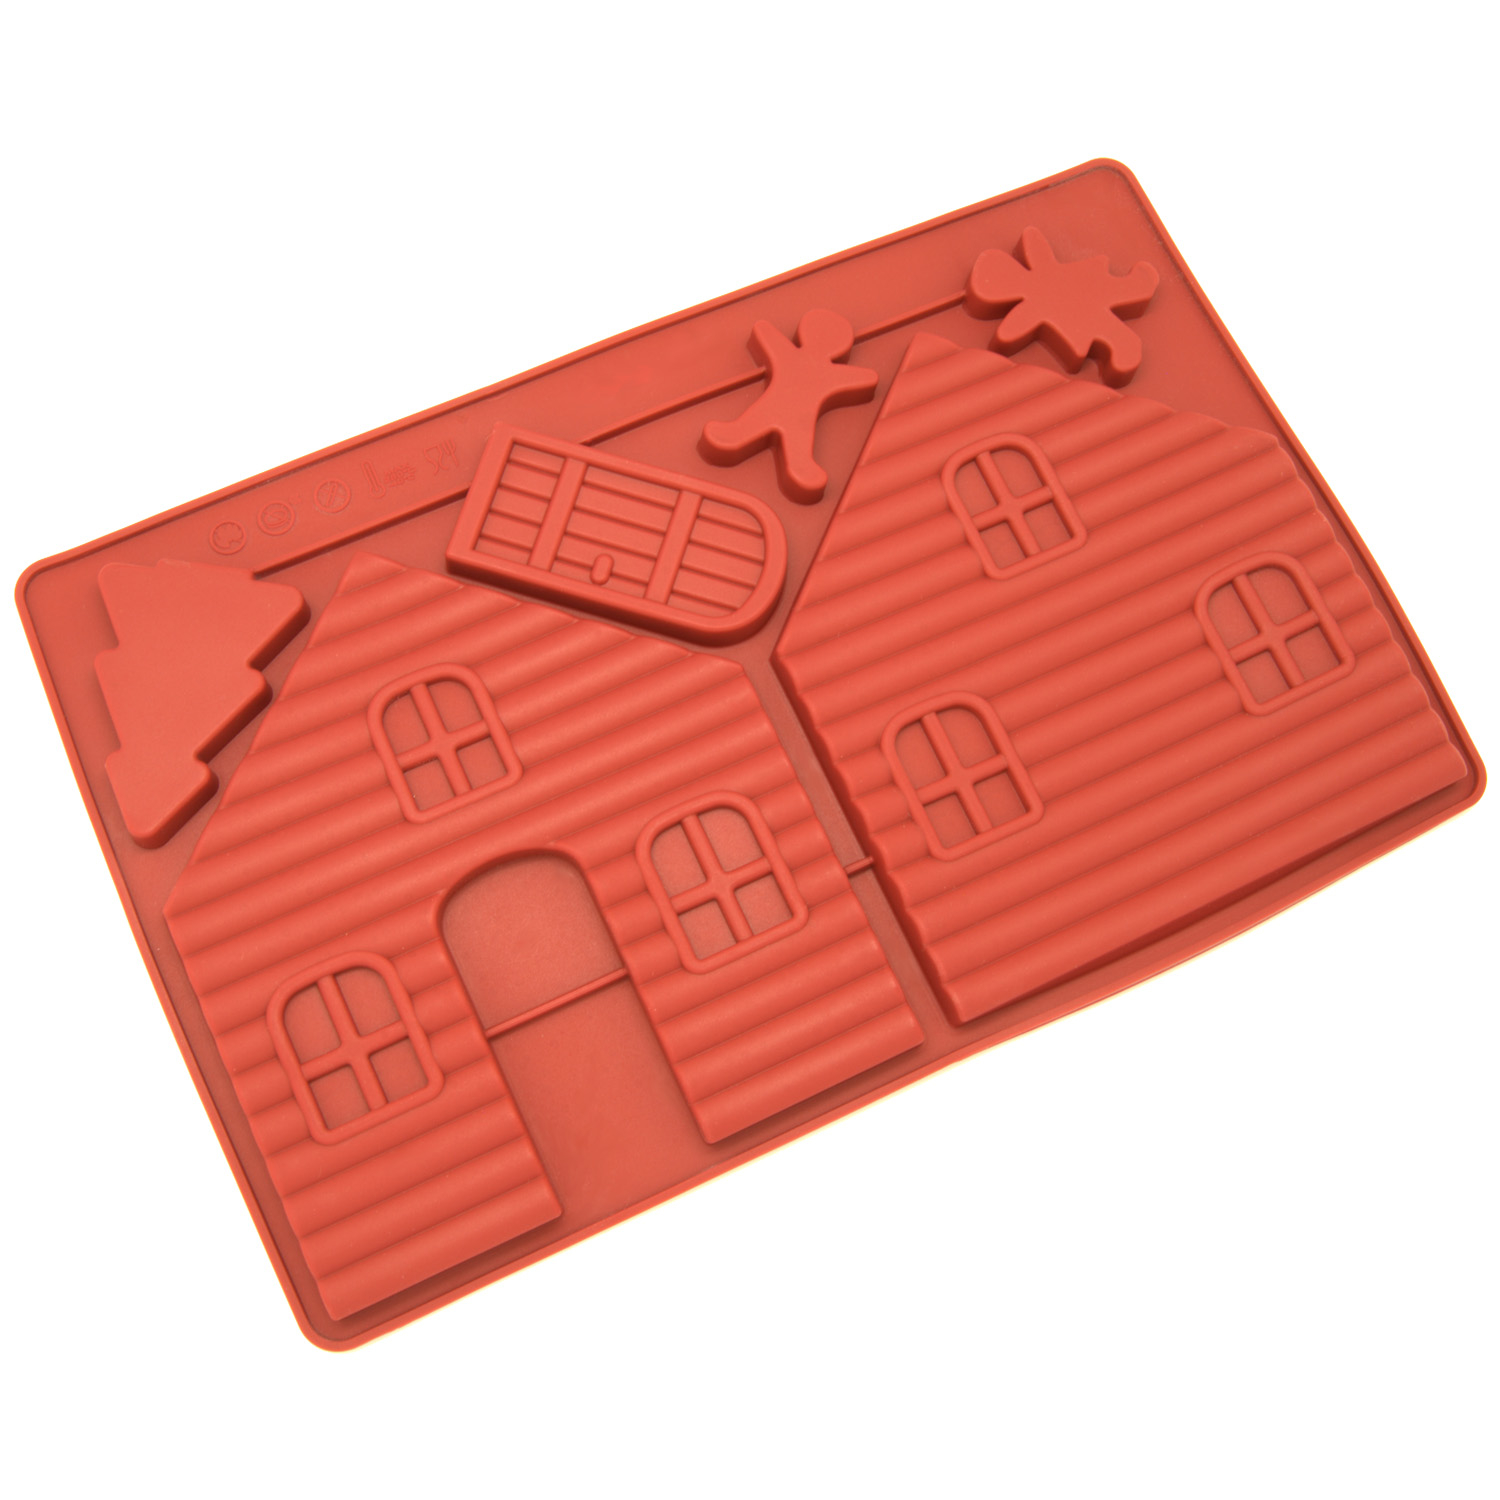 Freshware Silicone Mold, Chocoalte Mold, Candy Mold for Gingerbread House - 2 pcs